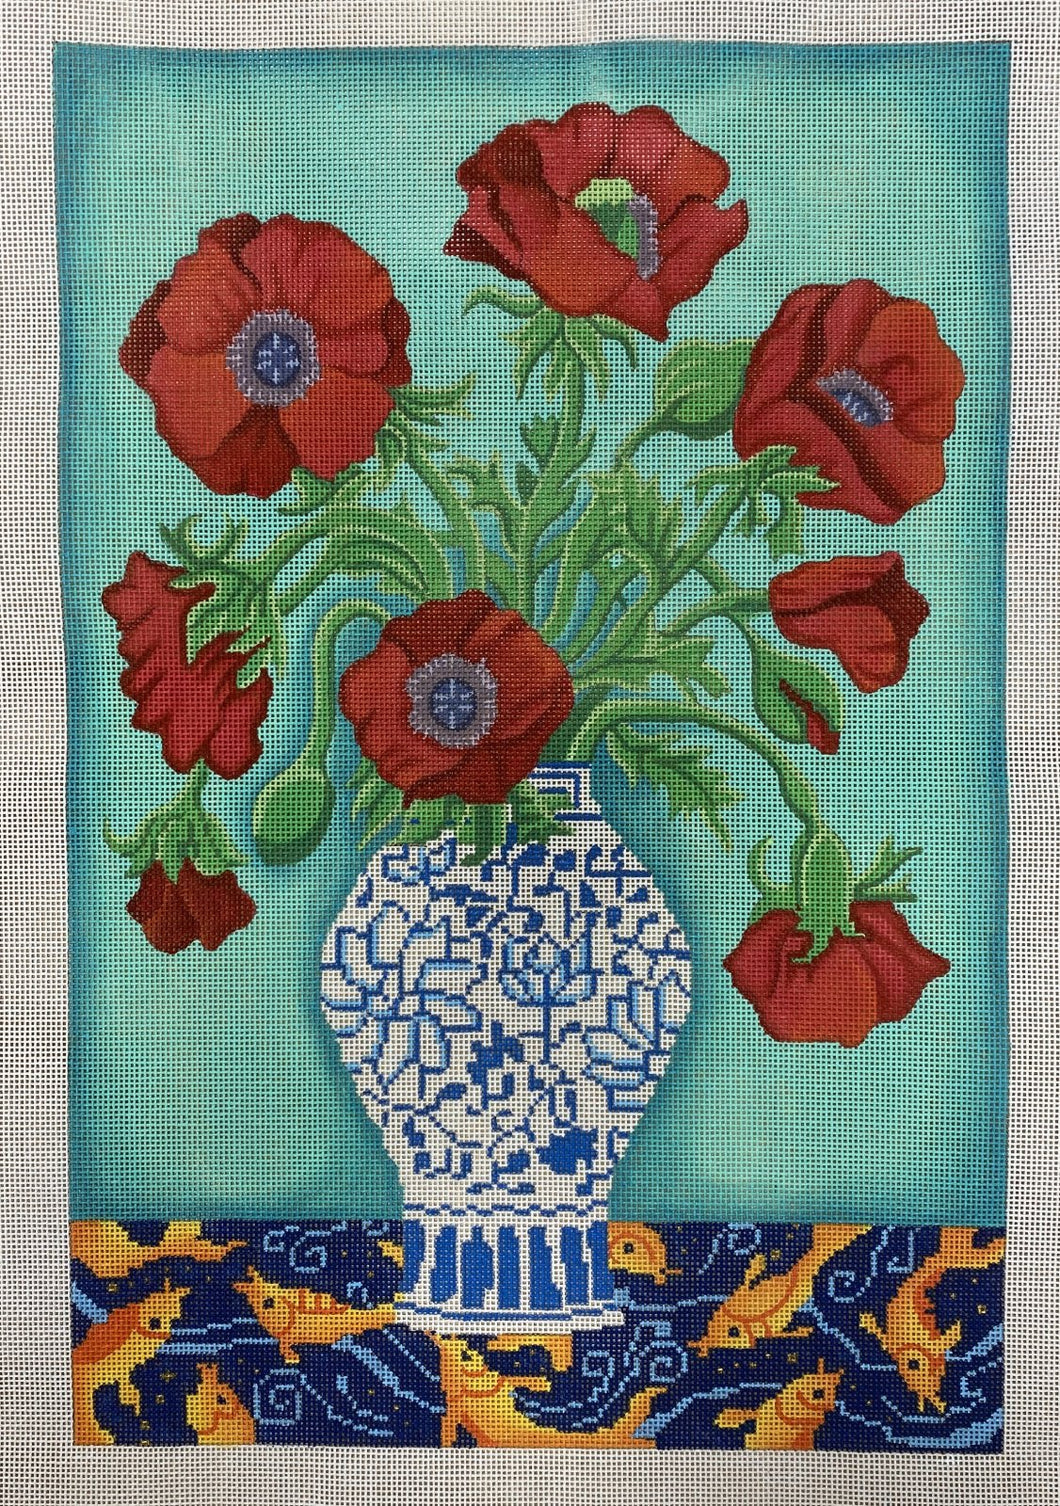 red poppies in vase